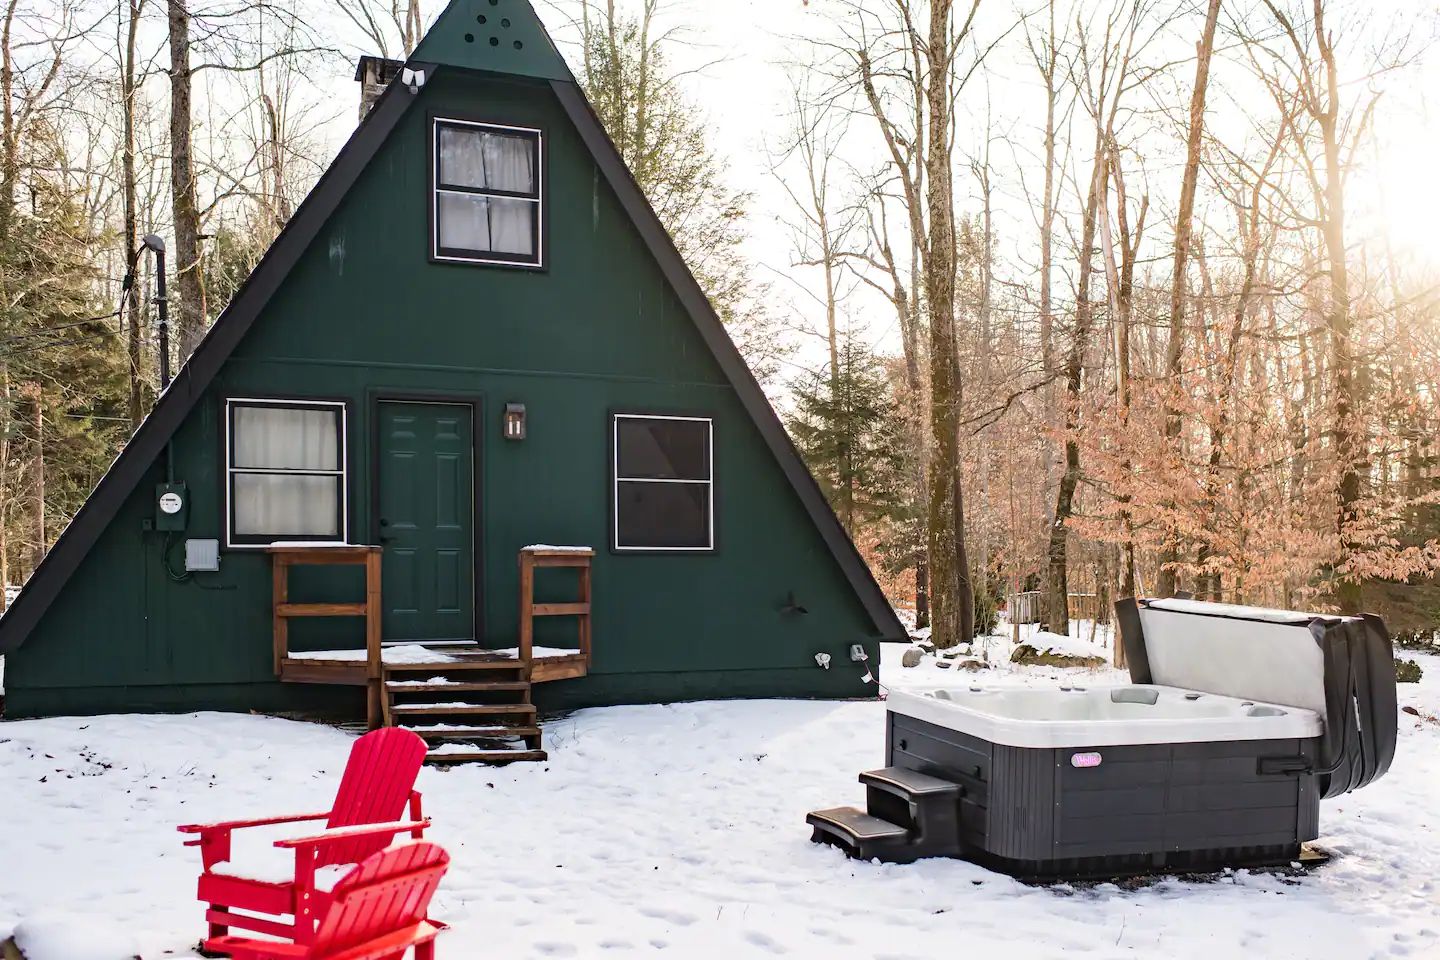 Classic AFrame Romantic Cabins in Pennsylvania With Hot Tub